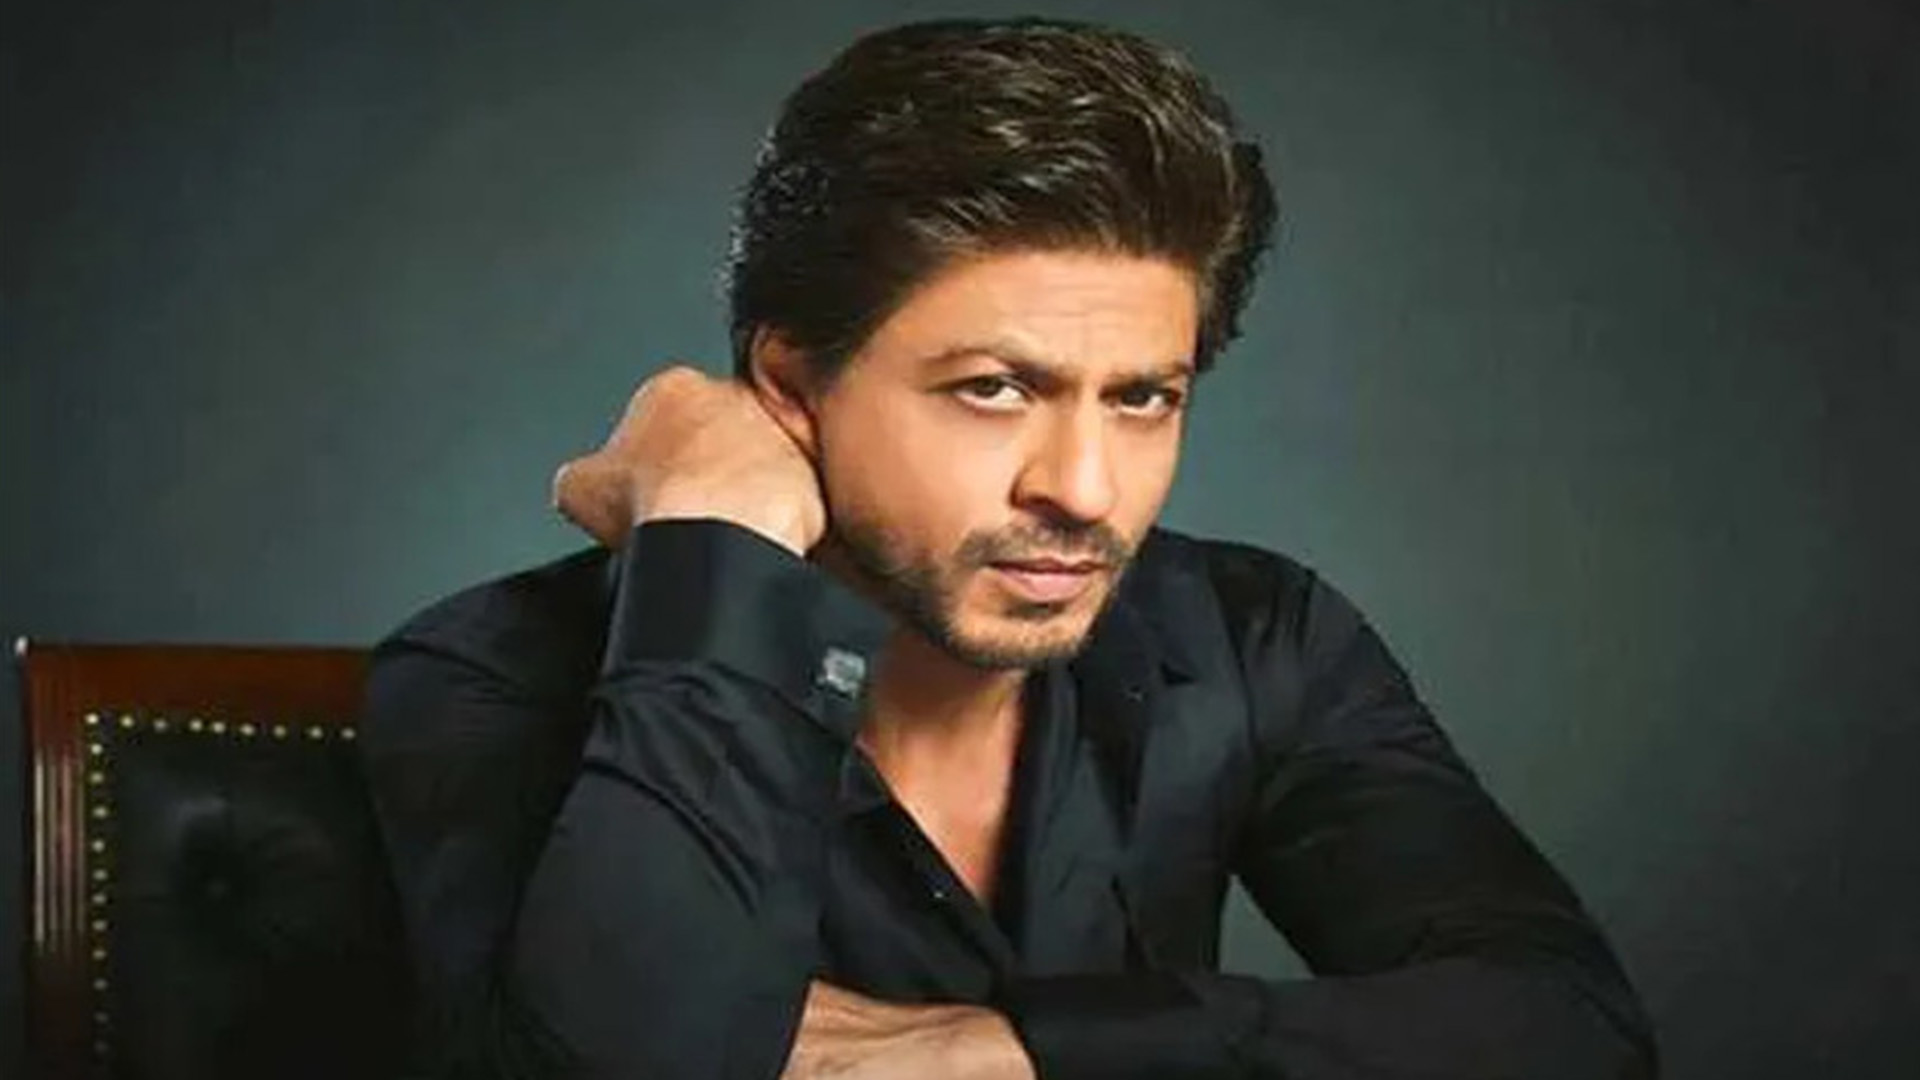 Shah Rukh Khan making a new film after two years break